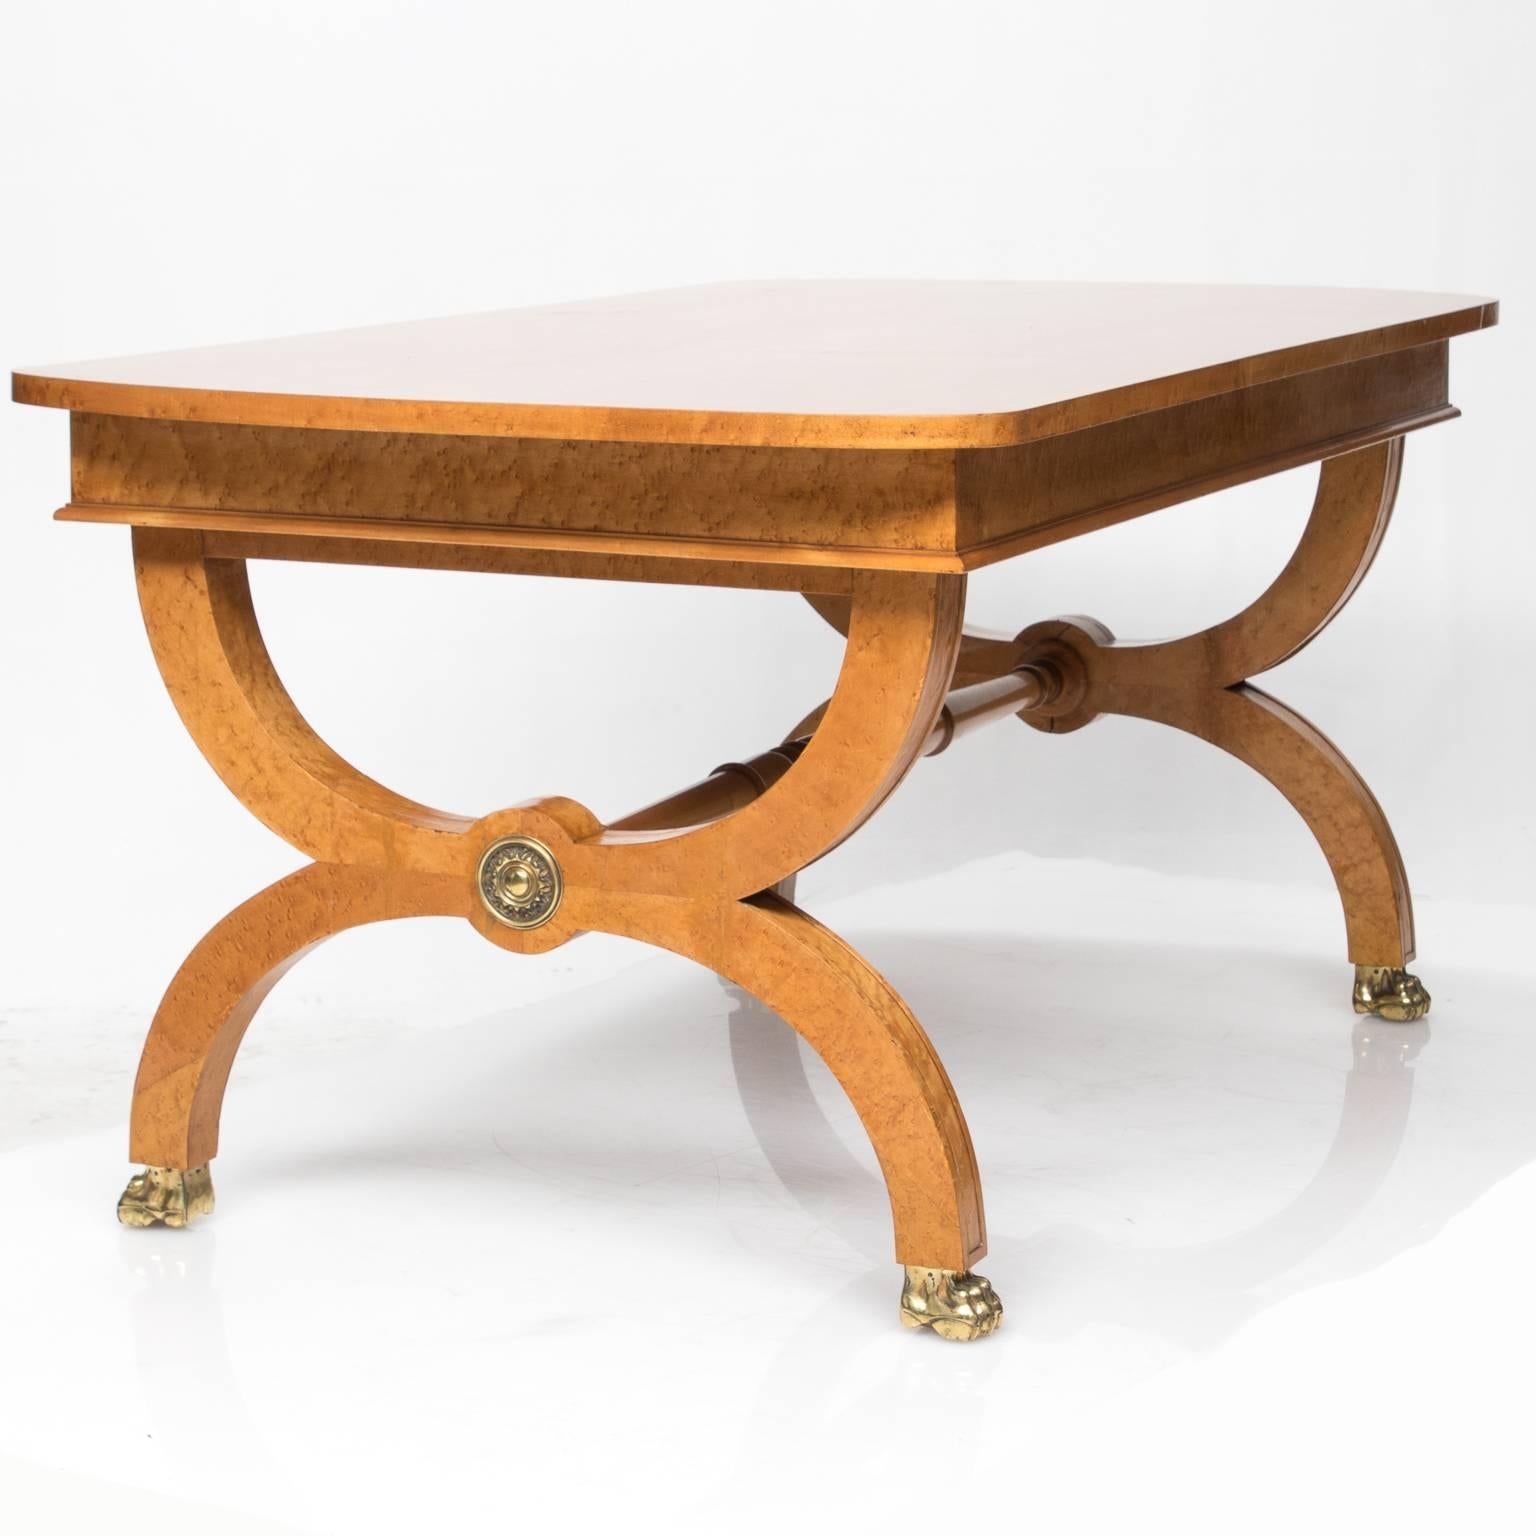 Purchased in France is this Fine bird's-eye maple Biedermeier style table with an elegant X-shaped supports connected with a turned stretcher. Brass mounts on supports and brass capped claw feet. Multifunctional table. Beautiful cuts of the